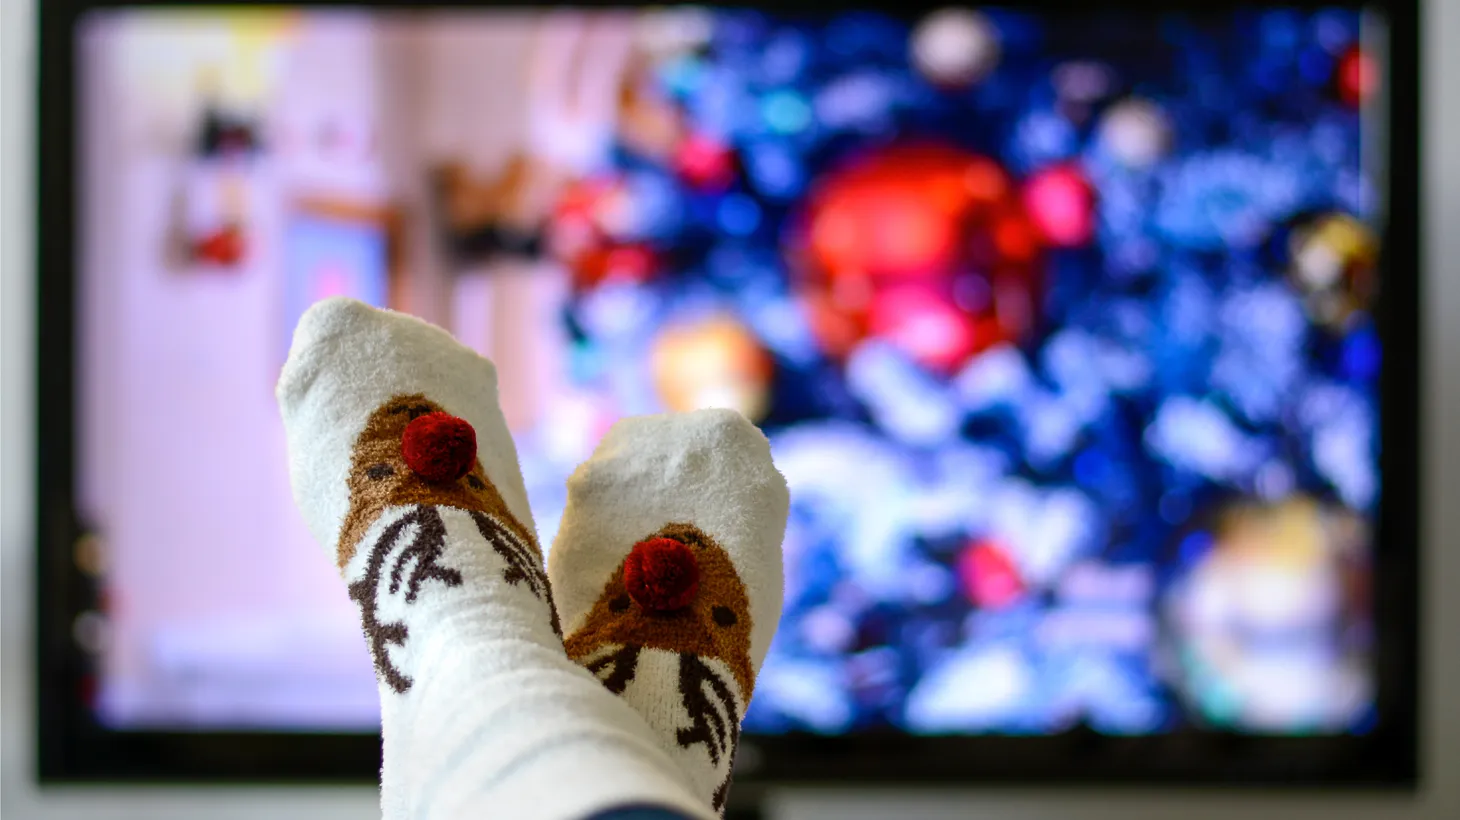 Flip on the TV or open any streaming app, and you’re likely bombarded with holiday movies. What to choose?